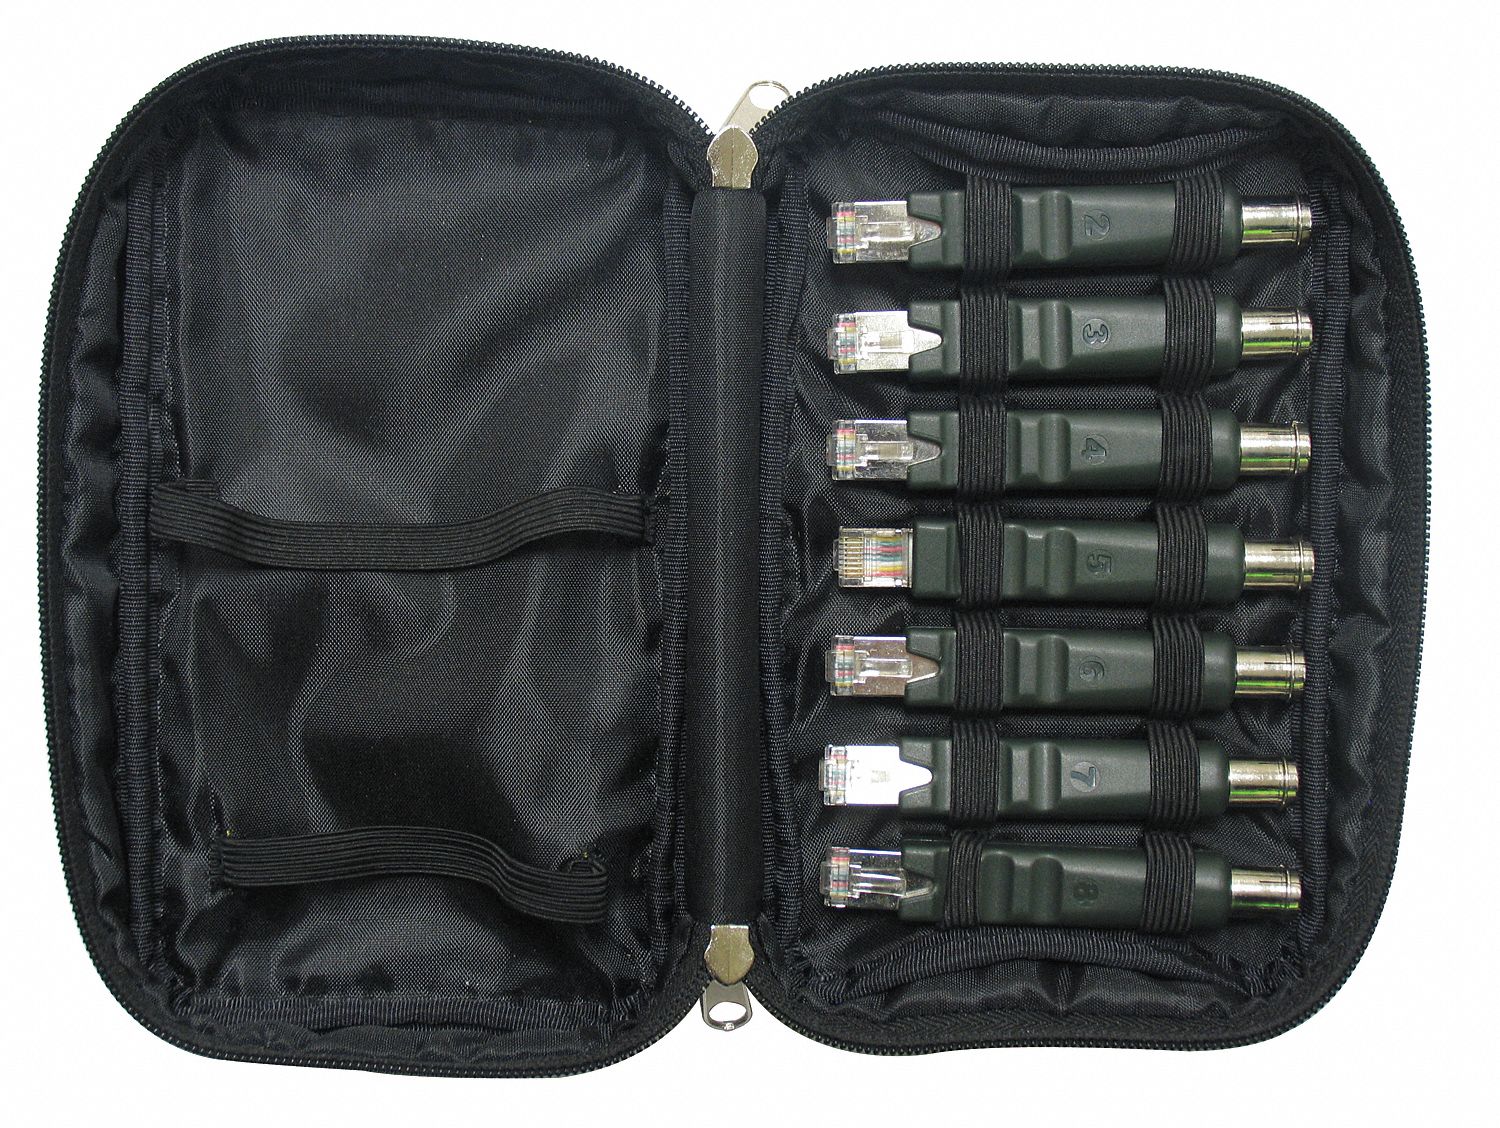 6JJJ4 - Carry Case and Connectors For NETcat-500